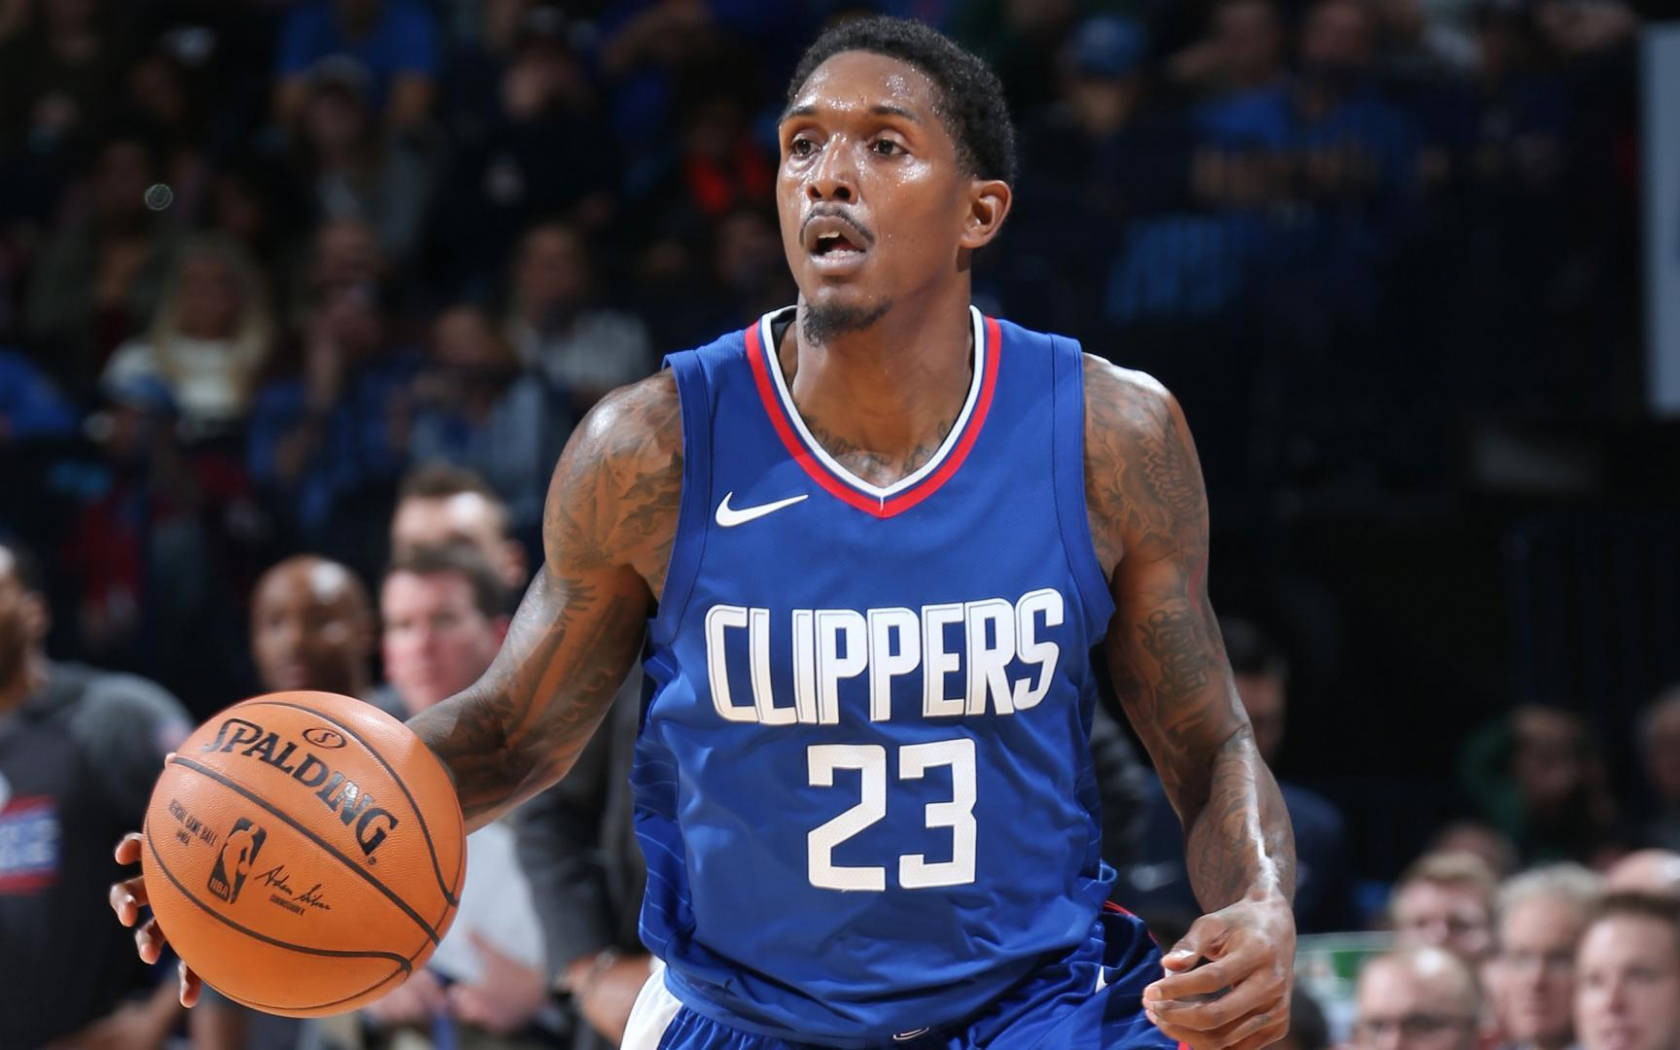 Lou Williams Bright Blue Clippers Jersey tapet. Wallpaper